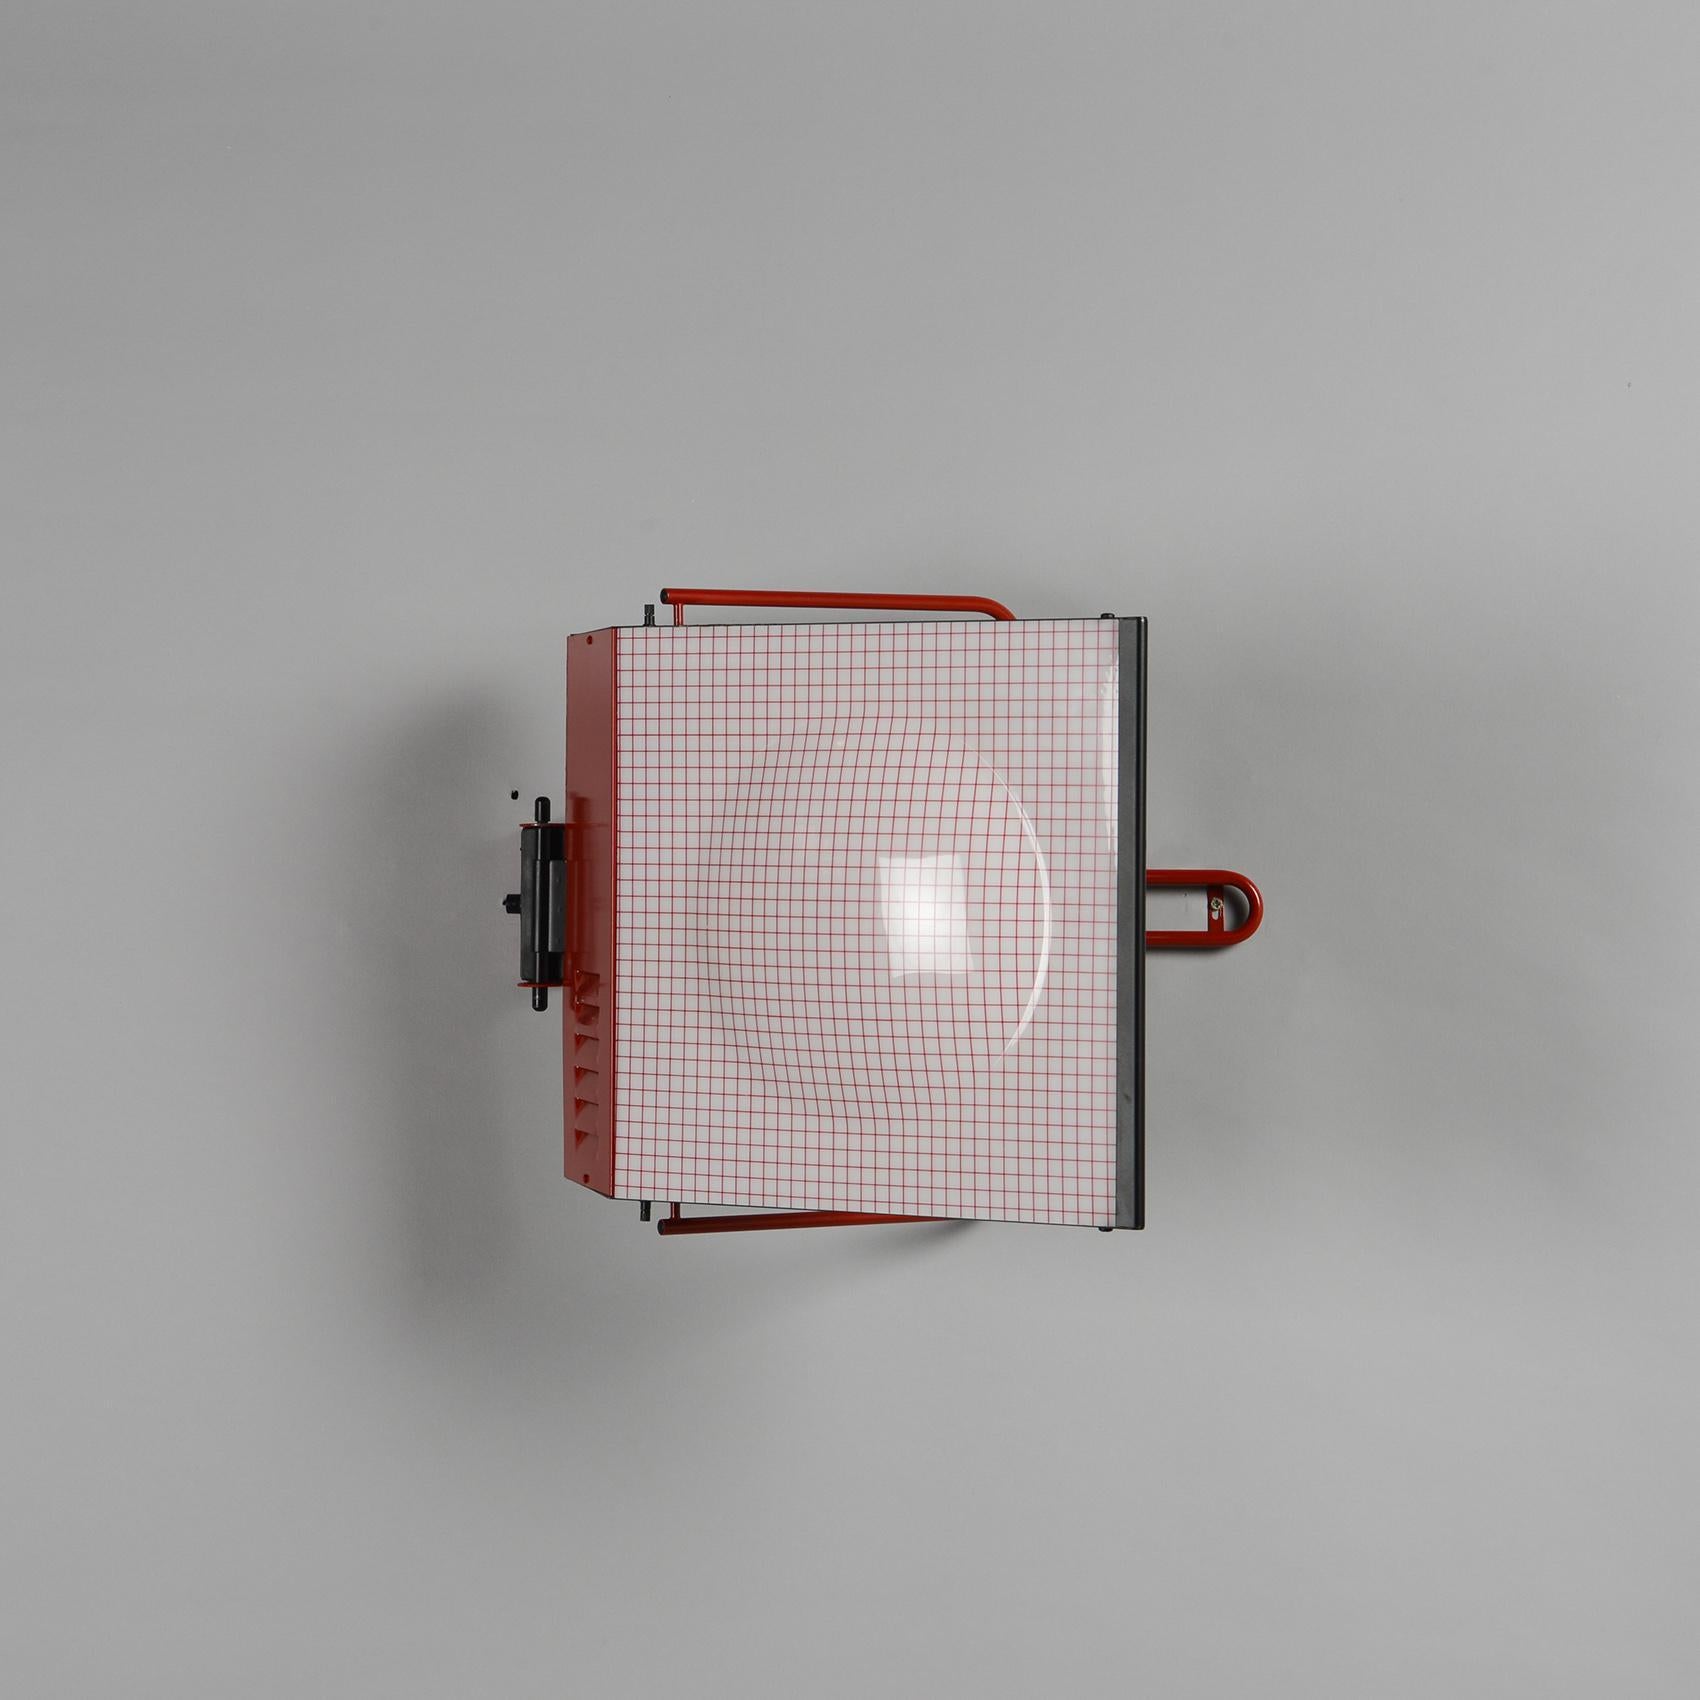 Post-Modern Pair of Wall Lights, Model Cabriolet by Stilnovo, circa 1980 For Sale